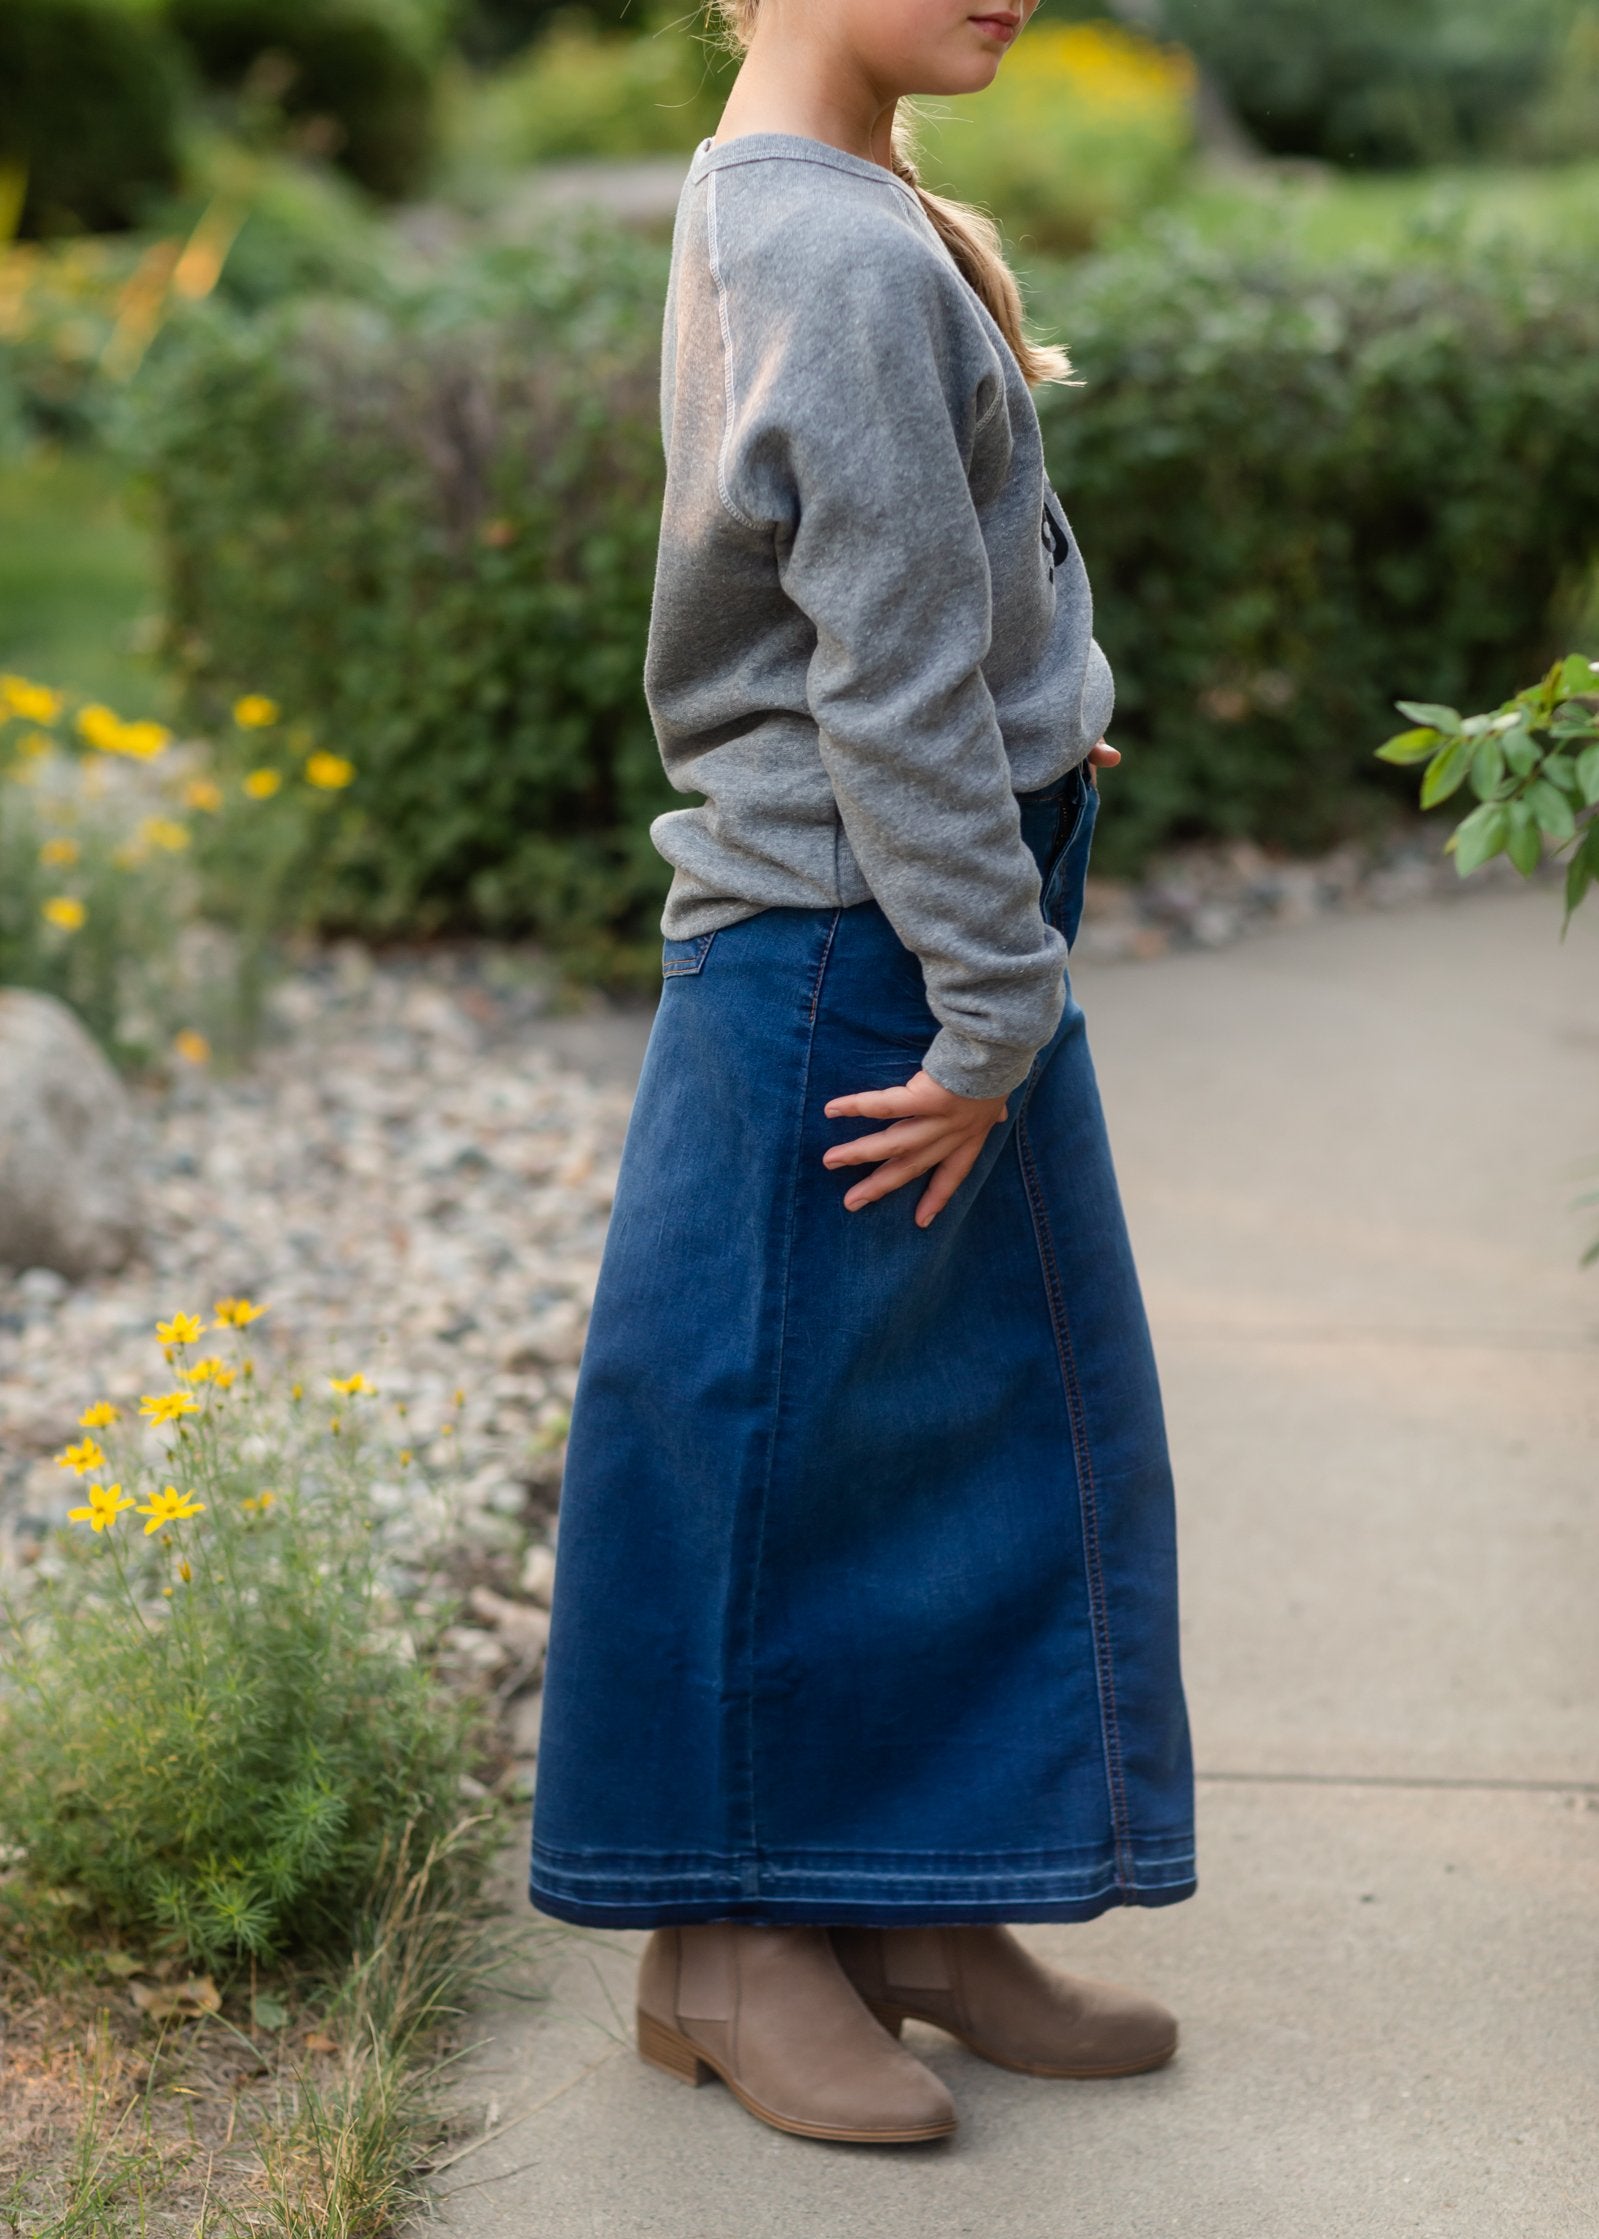 Cute Maxi Skirts for Fall 2022